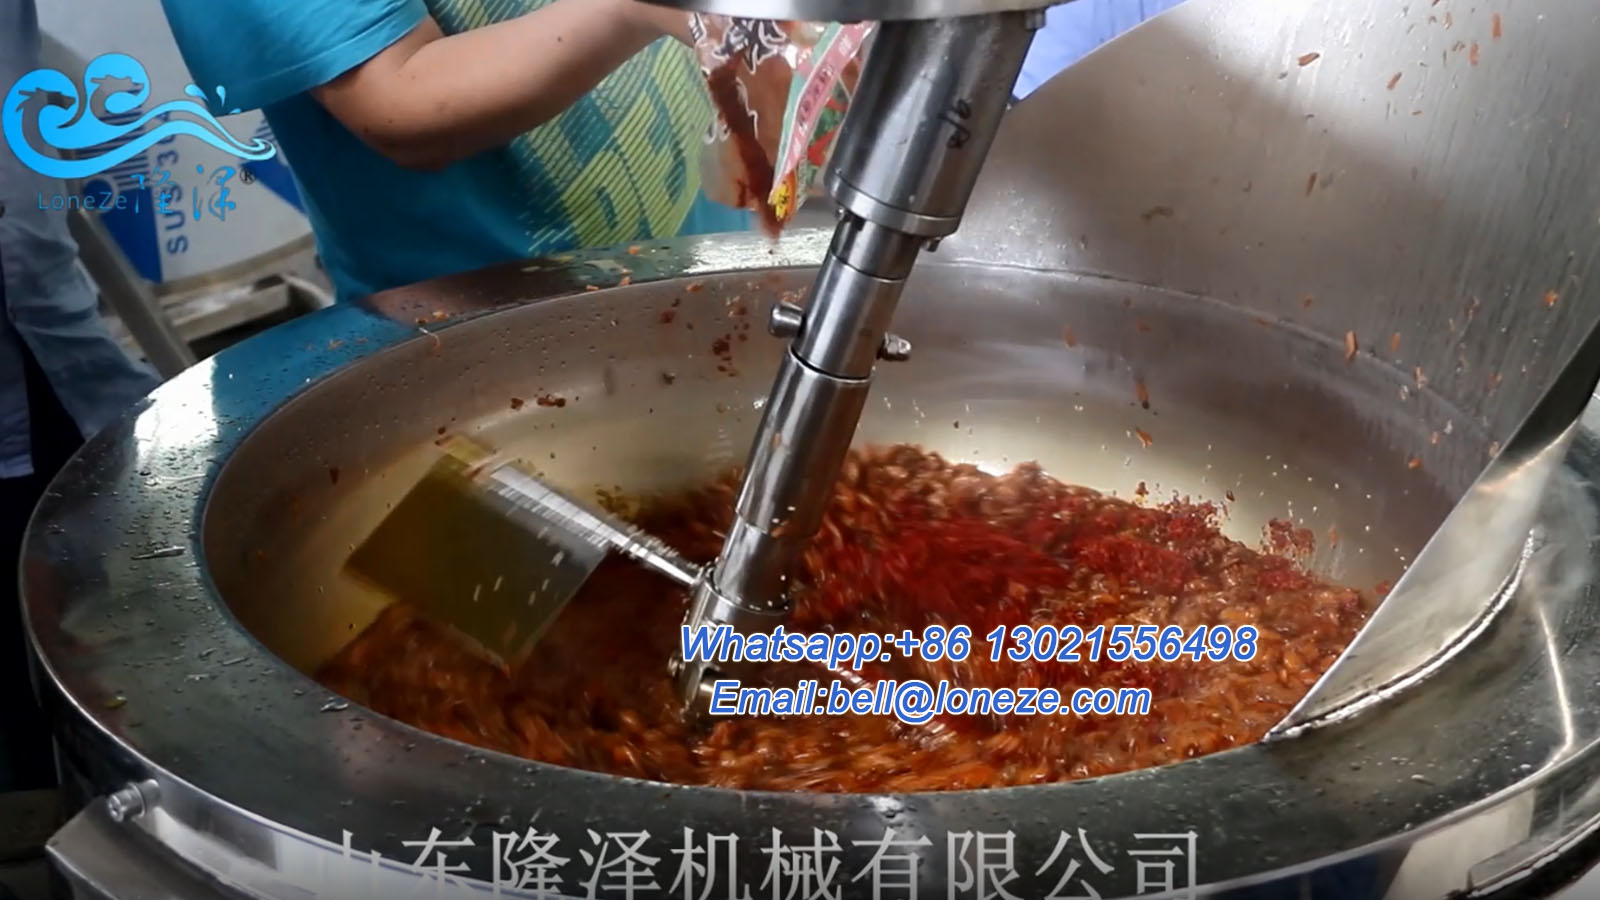 Automatic Planetary Sauce Cooking Mixer Machine